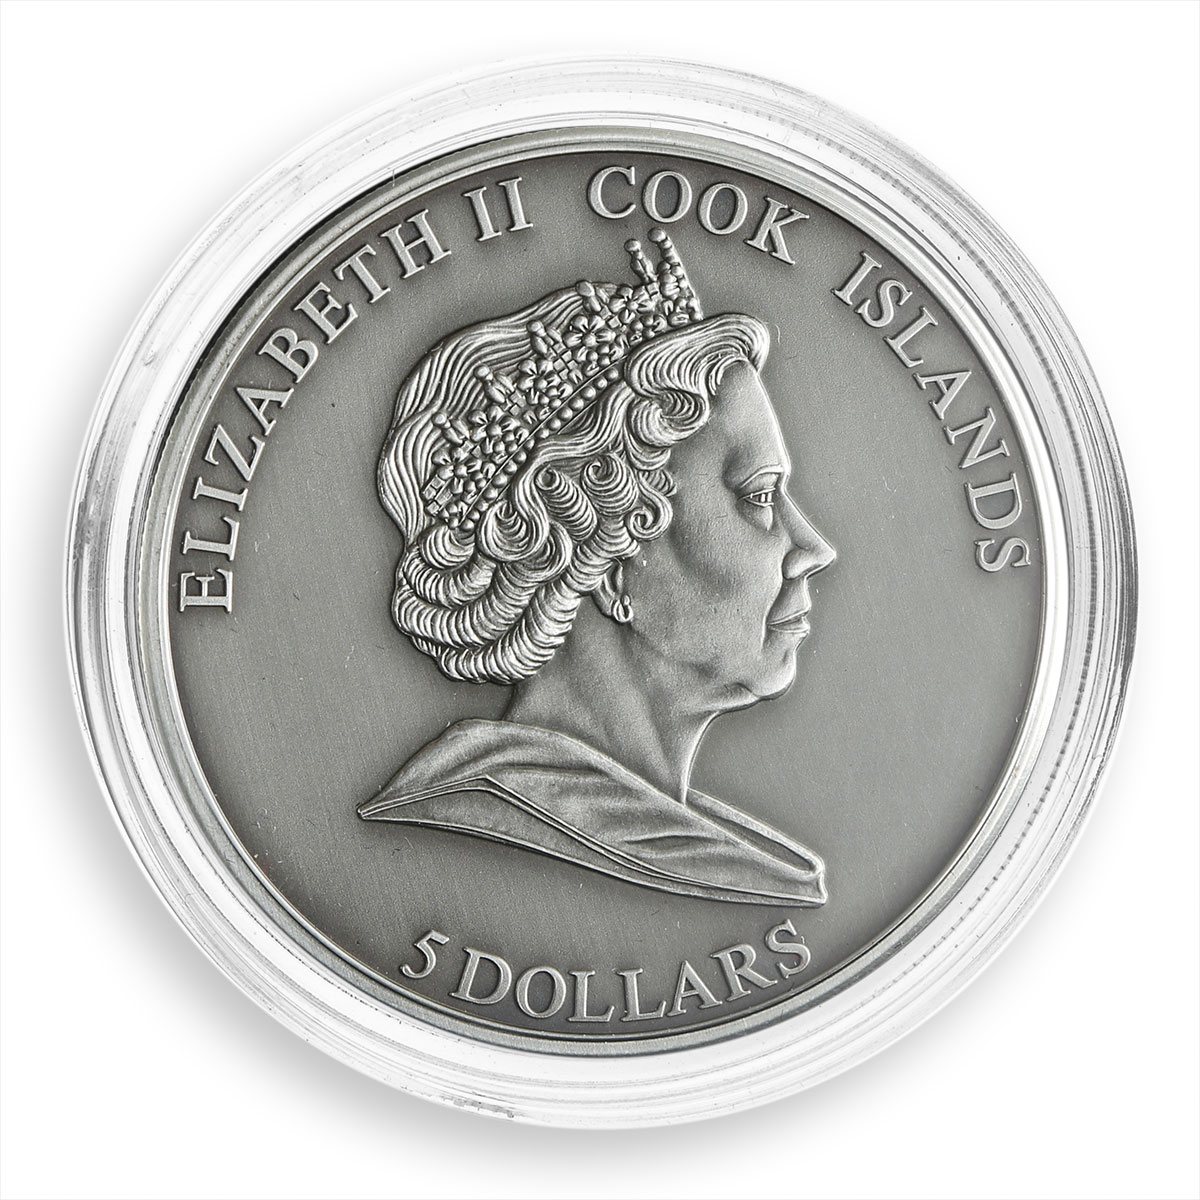 Cook Islands 5 Dollars The Day of Prudence Silver Coin 2010